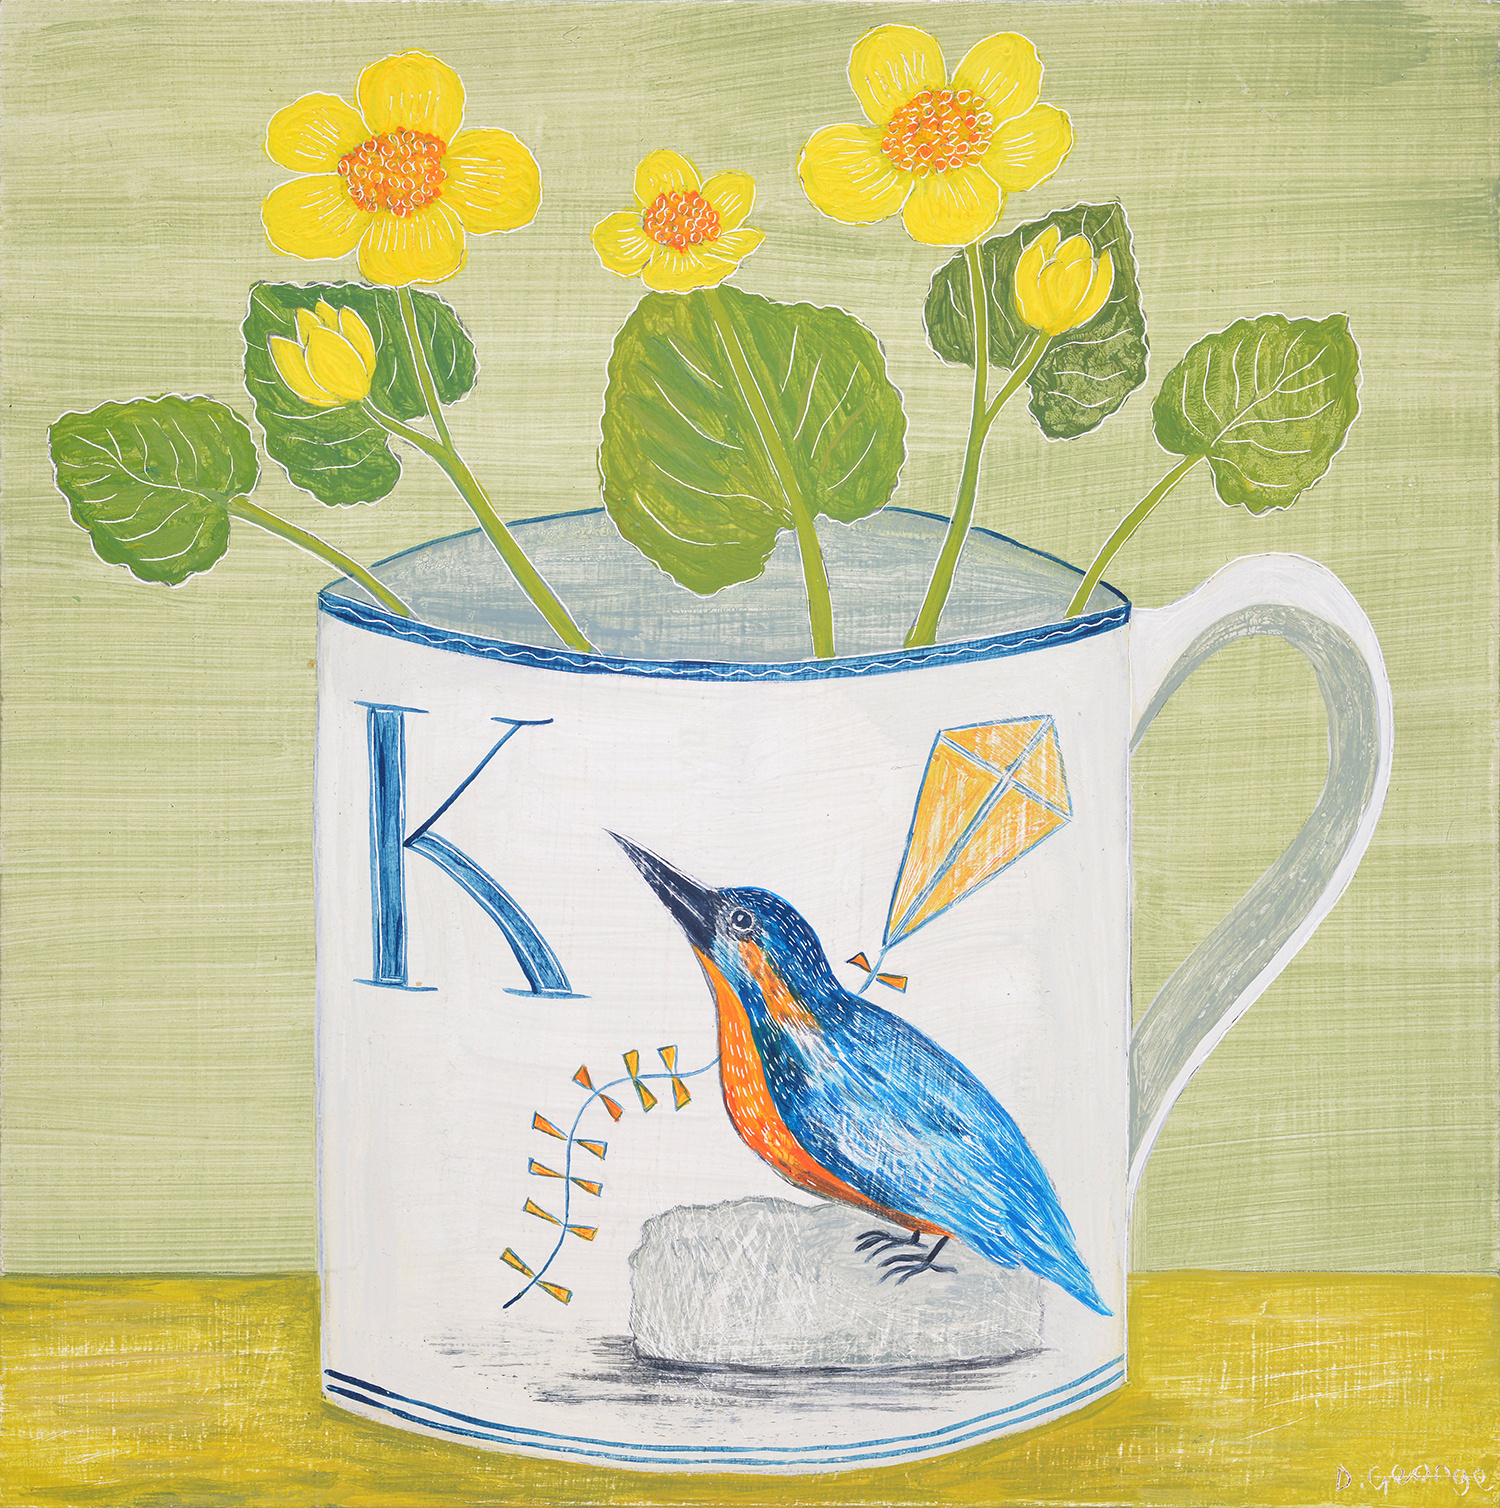 Kingfisher and King Cups by Debbie George